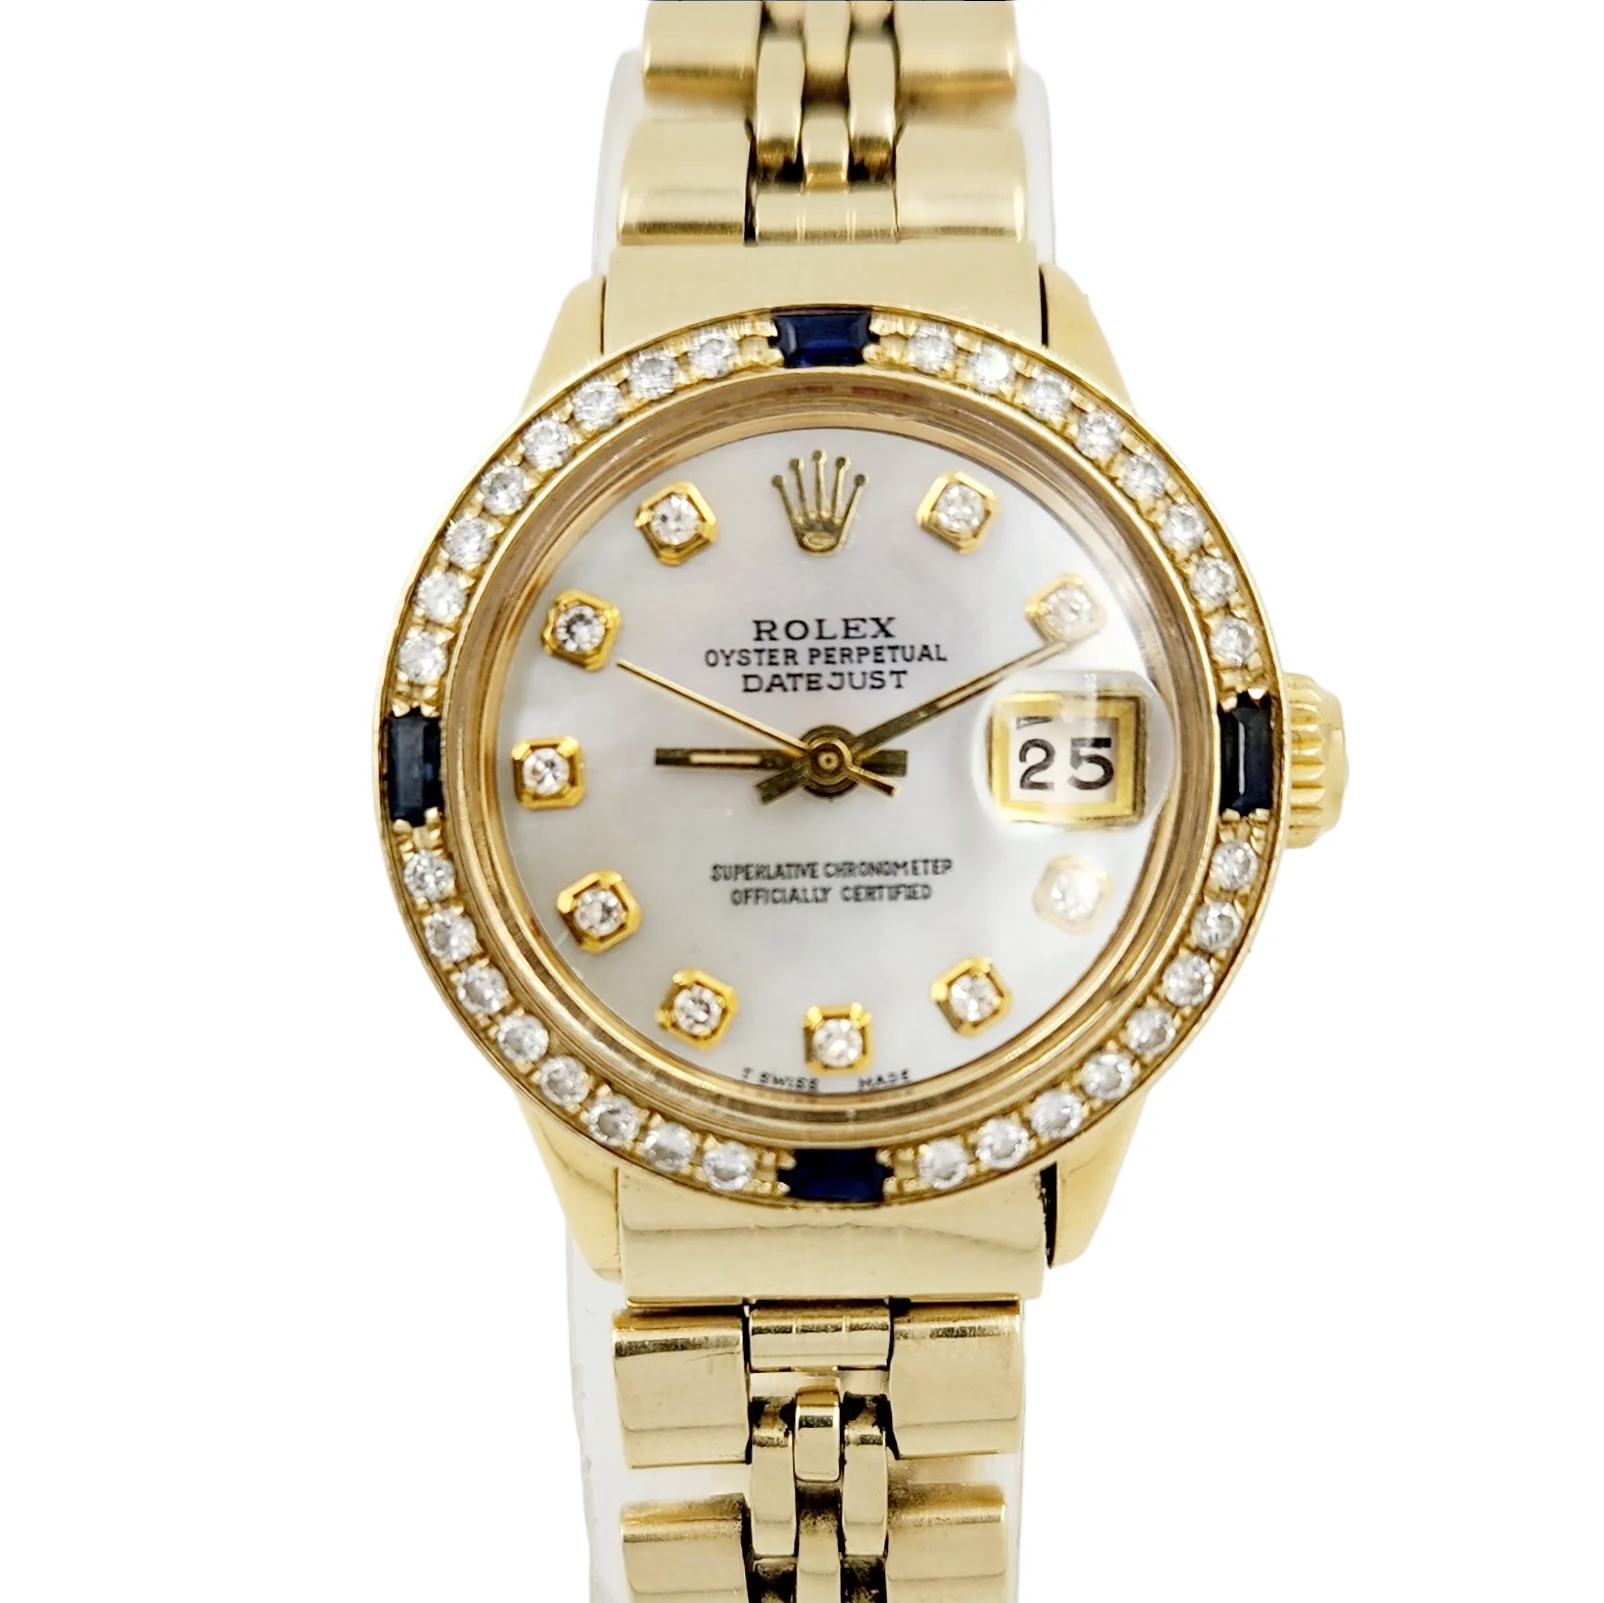 Ladies Rolex DateJust 26mm Vintage Solid 14K Yellow Gold Watch with Mother of Pearl Diamond Dial and Blue Sapphire Diamond Bezel. (Pre-Owned 6517)